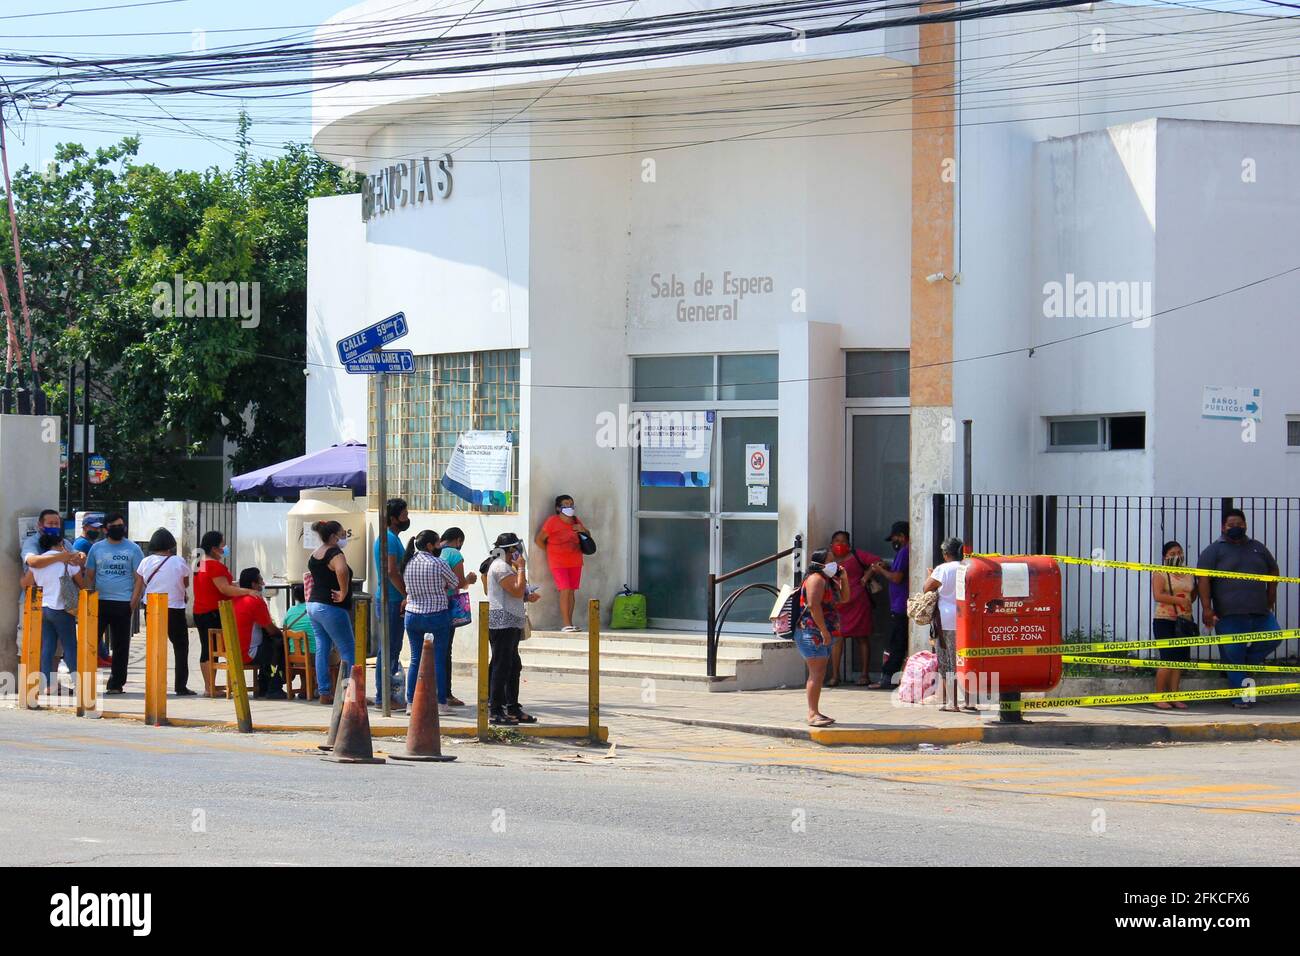 Mexican people standing in line in front of the Emergency entrance of a Public Hospital in Merida Mexico during the Covid-19 Pandemic Stock Photo